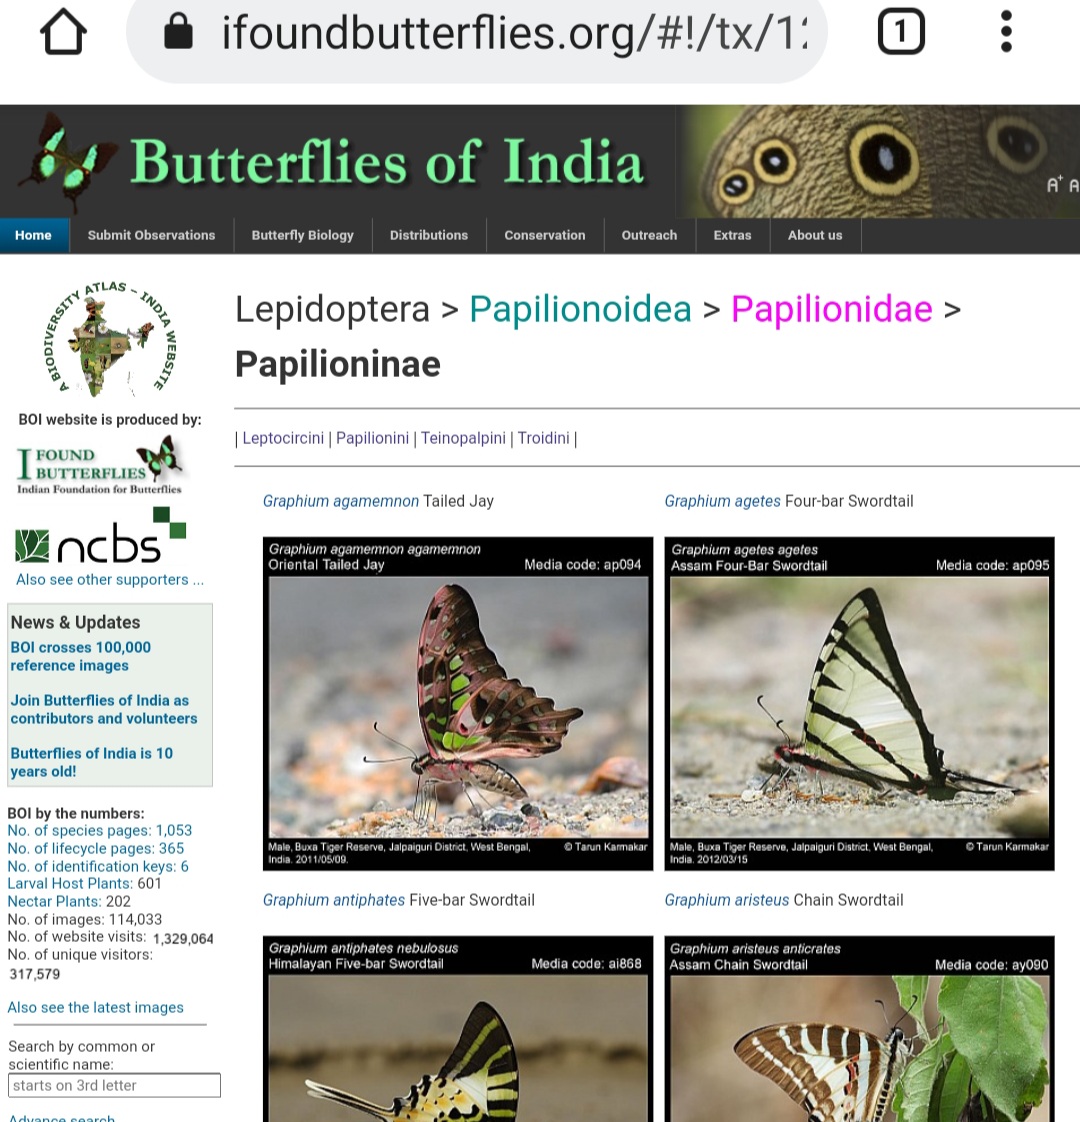 BOI has achieved another milestone! More than 114000 reference images are available now. Let's keep this momentum going and get more submissions during #BBM! Congratulations to the entire team! #bbm2021 ifoundbutterflies.org @krushnamegh @NCBS_Bangalore @IFoundButterfly